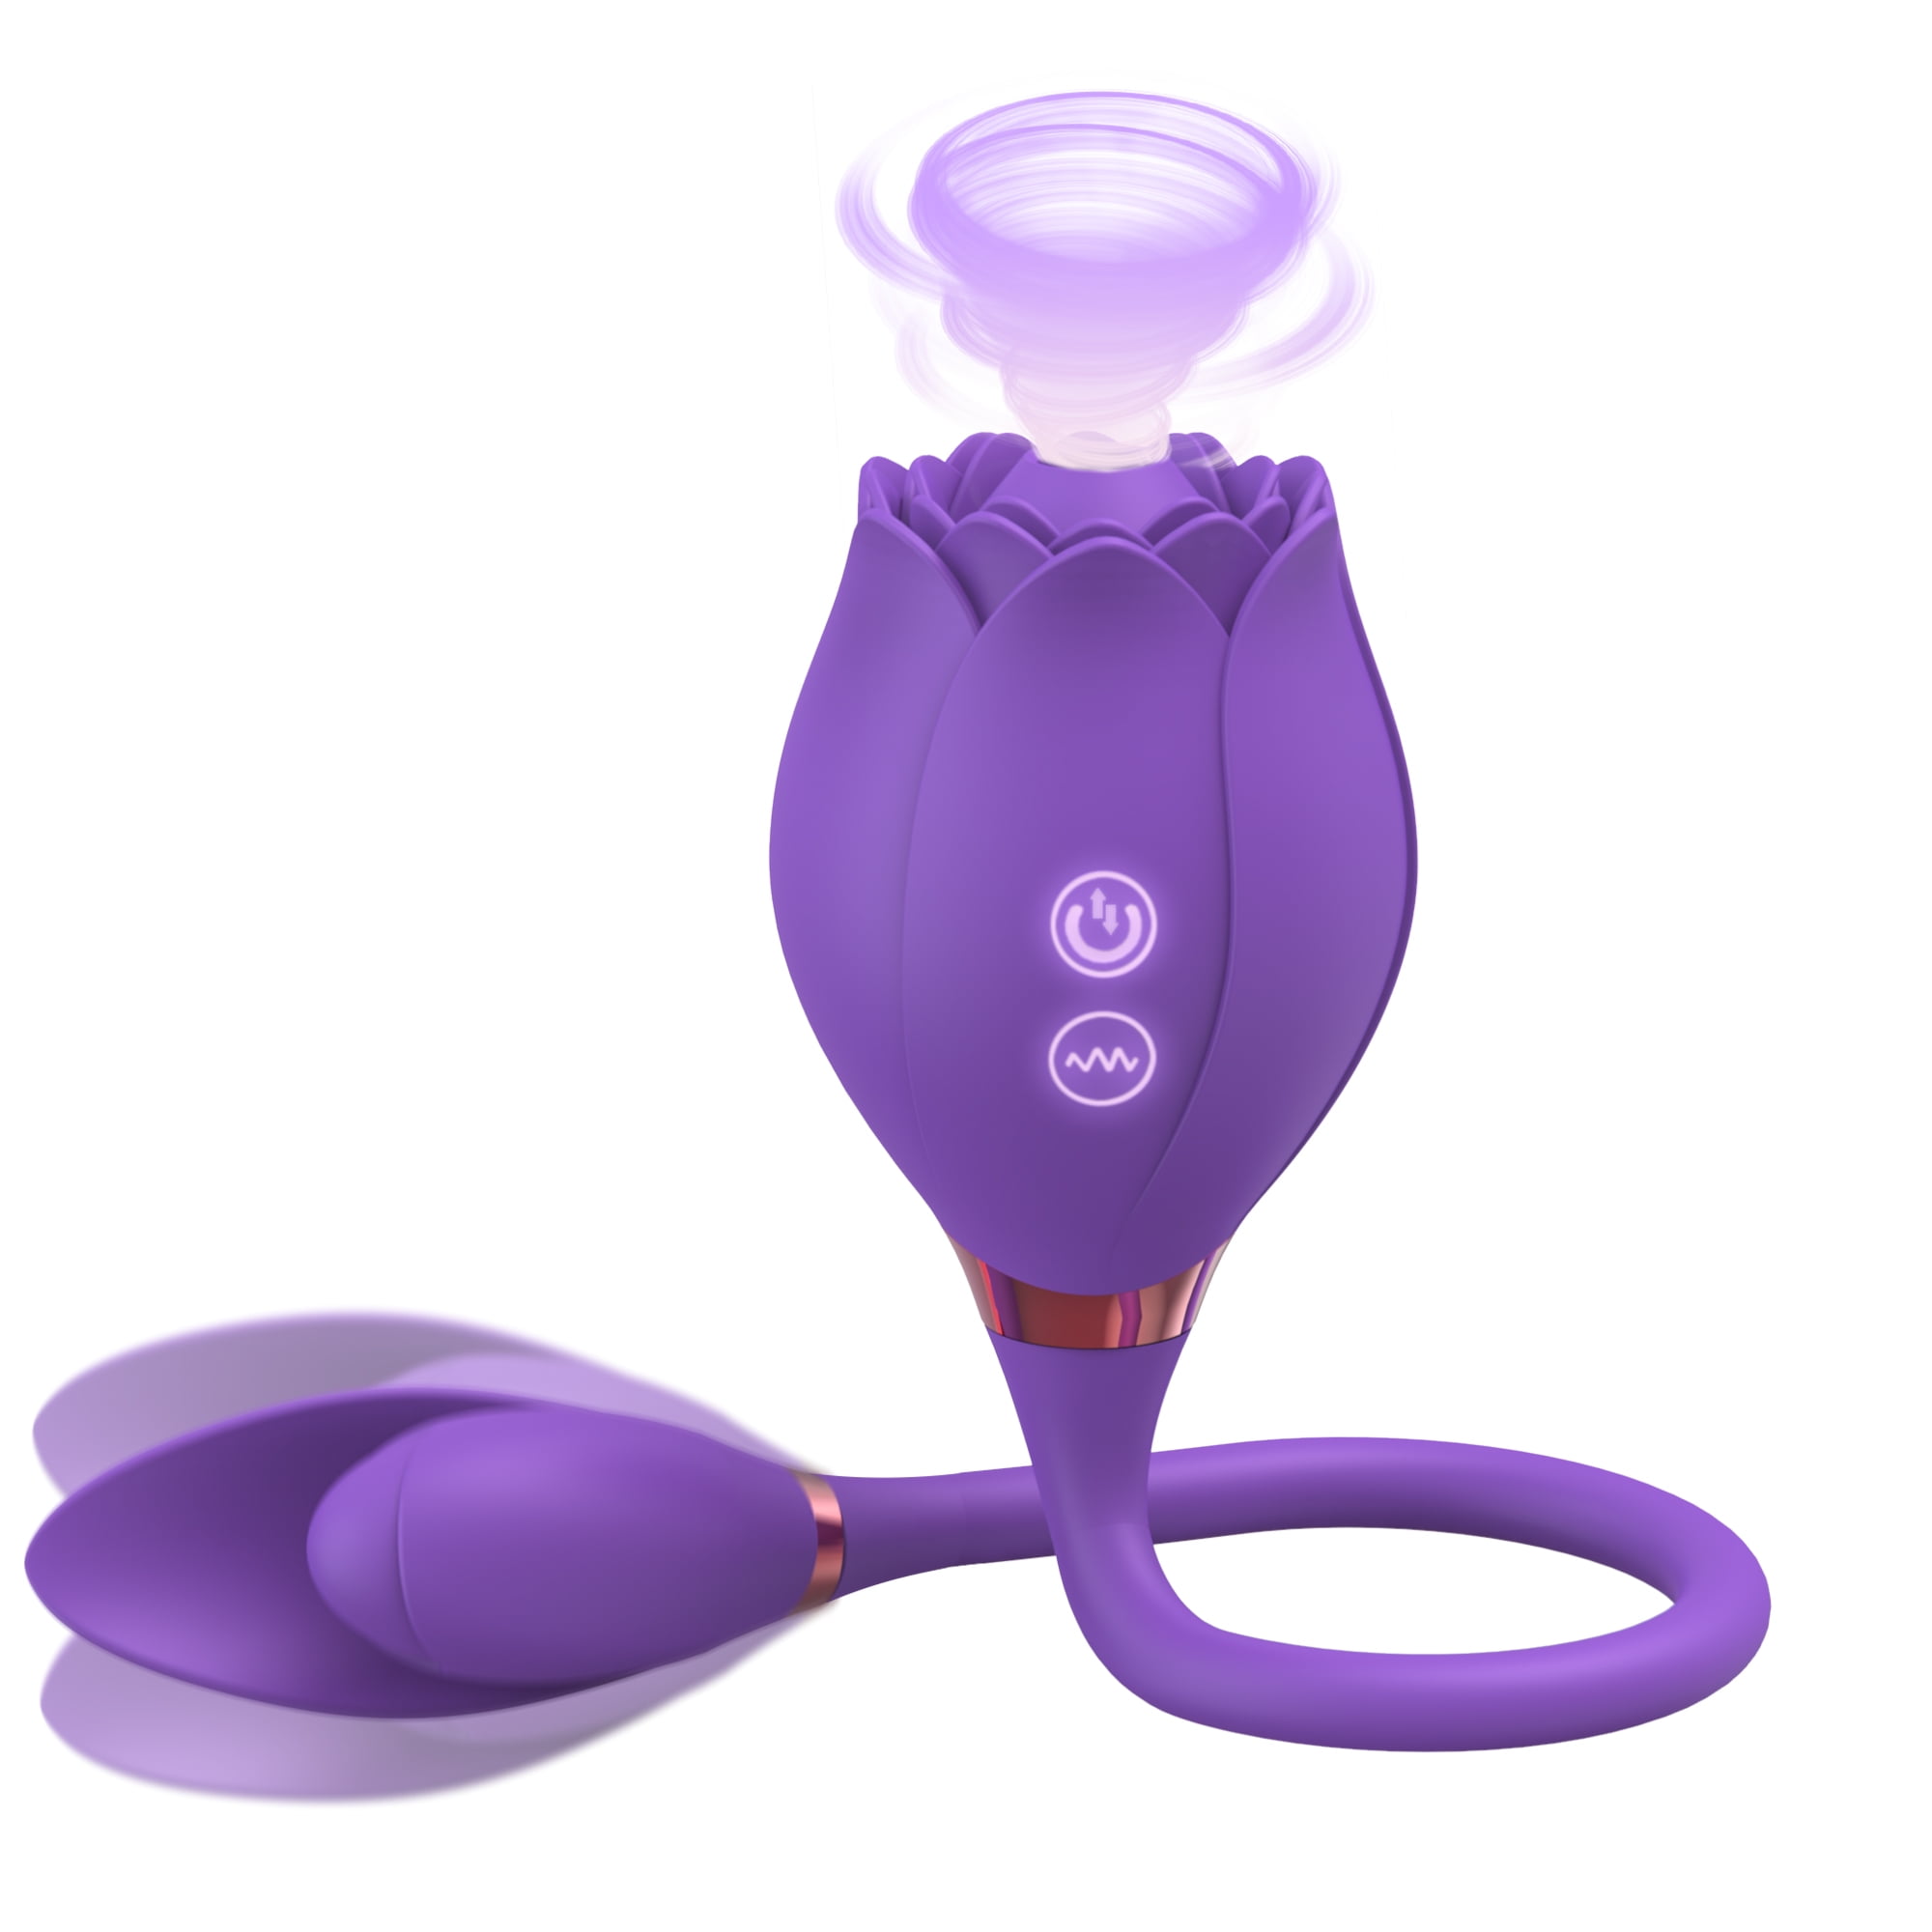 DARZU Rose Toy for Women, 3 in 1 Vibrators and Adult Sex Toys G Spot Clitoral Stimulator Sex Accessories for Adults Couples Women, Purple photo picture picture